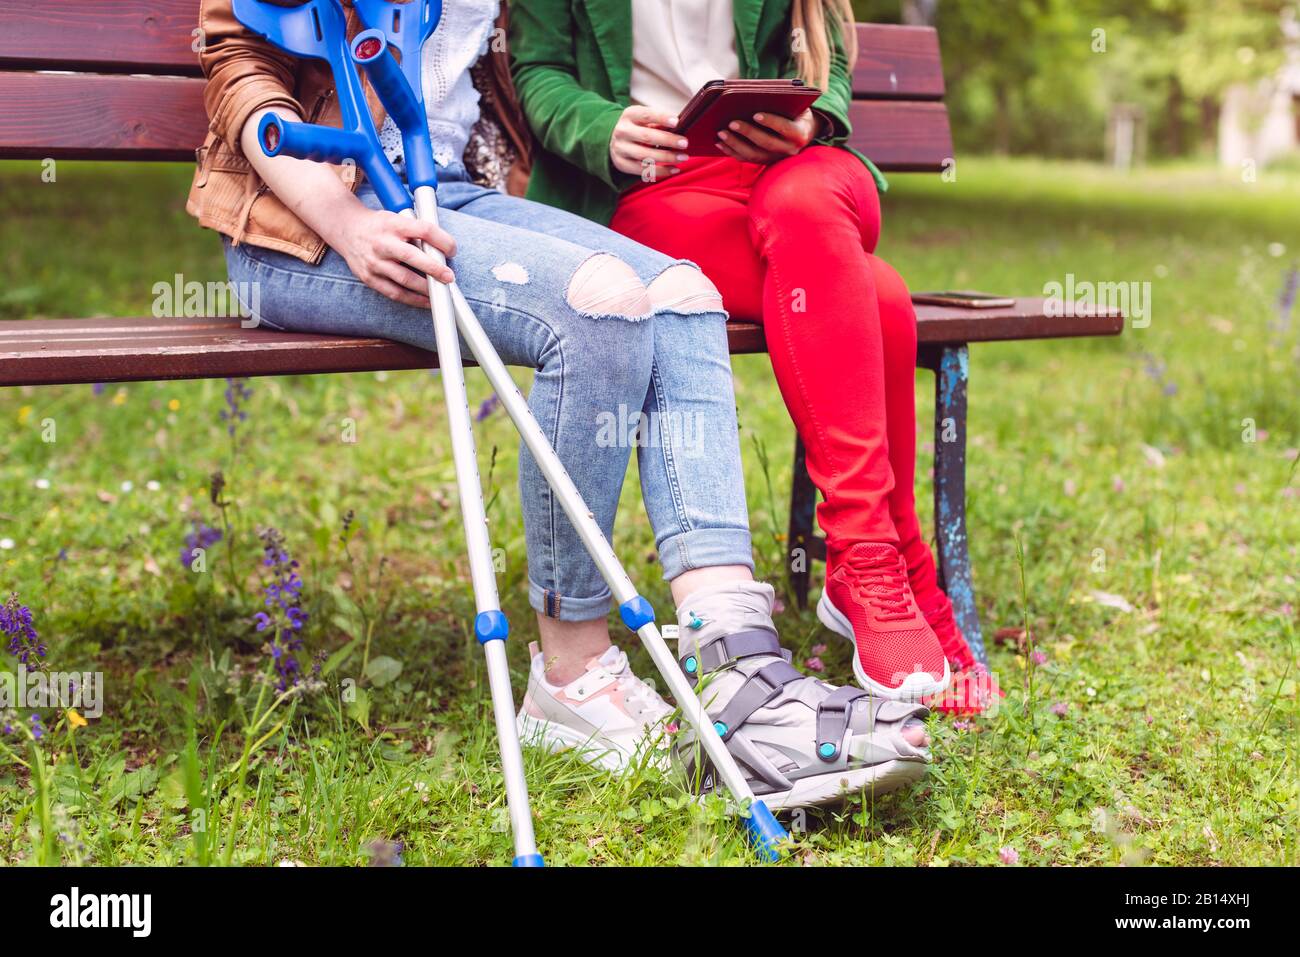 Woman spending time with her friend having a broken leg Stock Photo